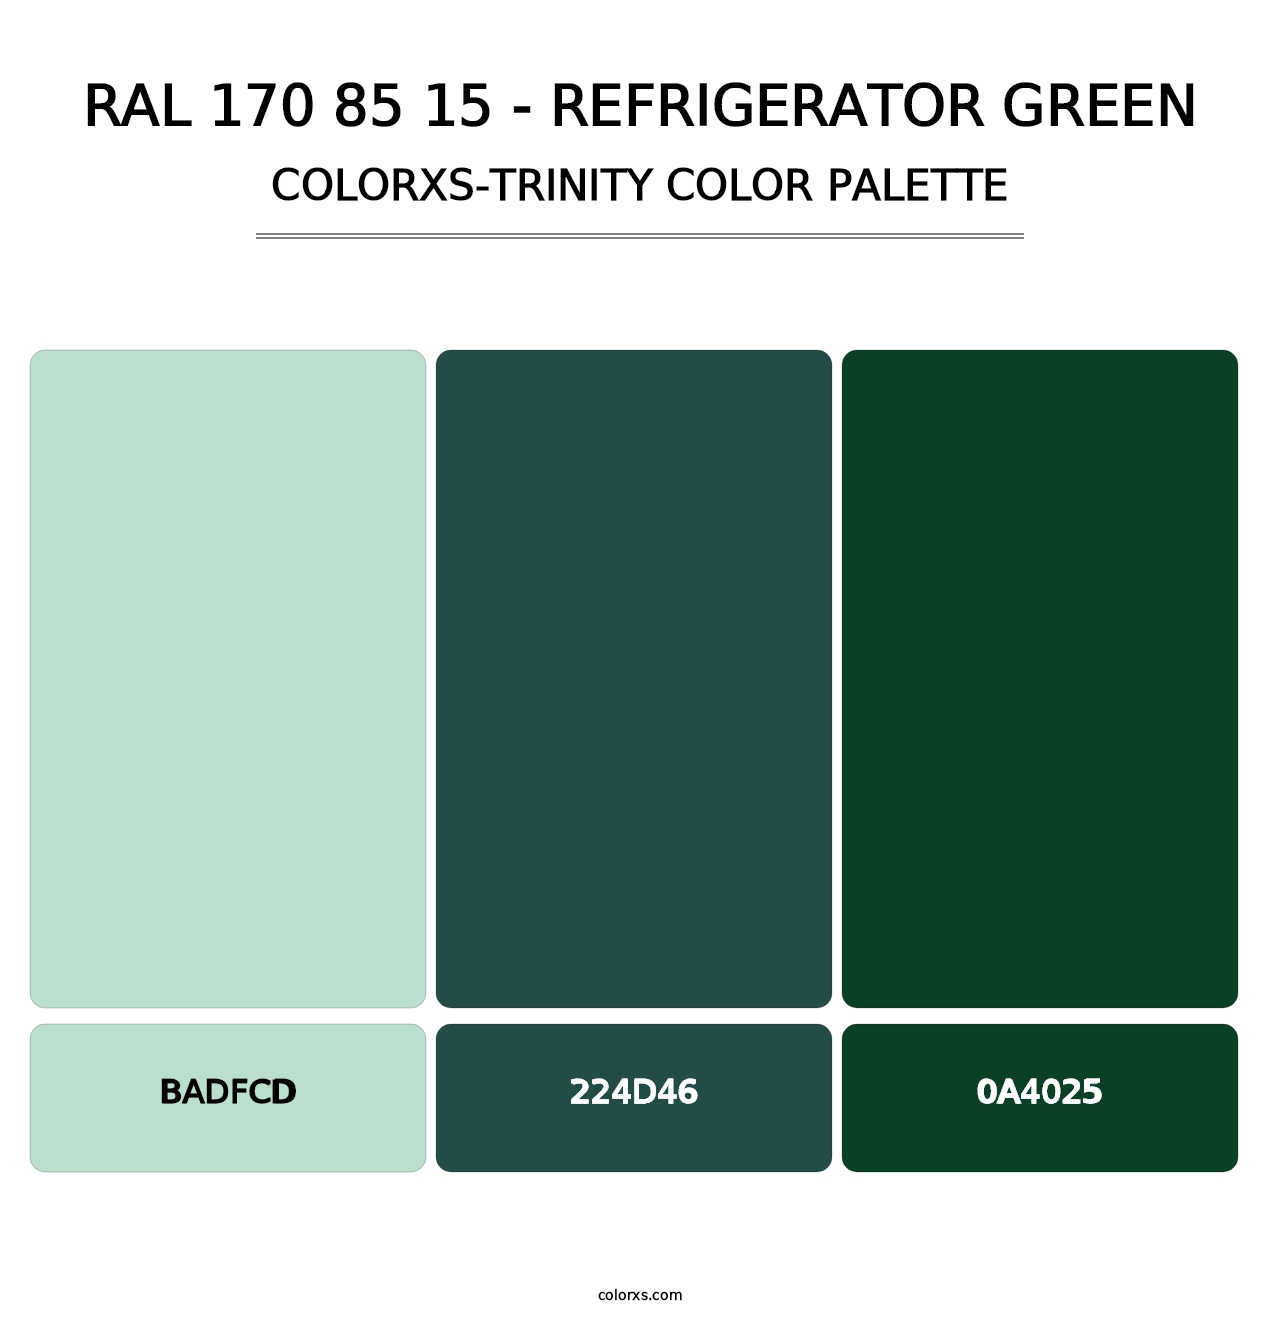 RAL 170 85 15 - Refrigerator Green - Colorxs Trinity Palette